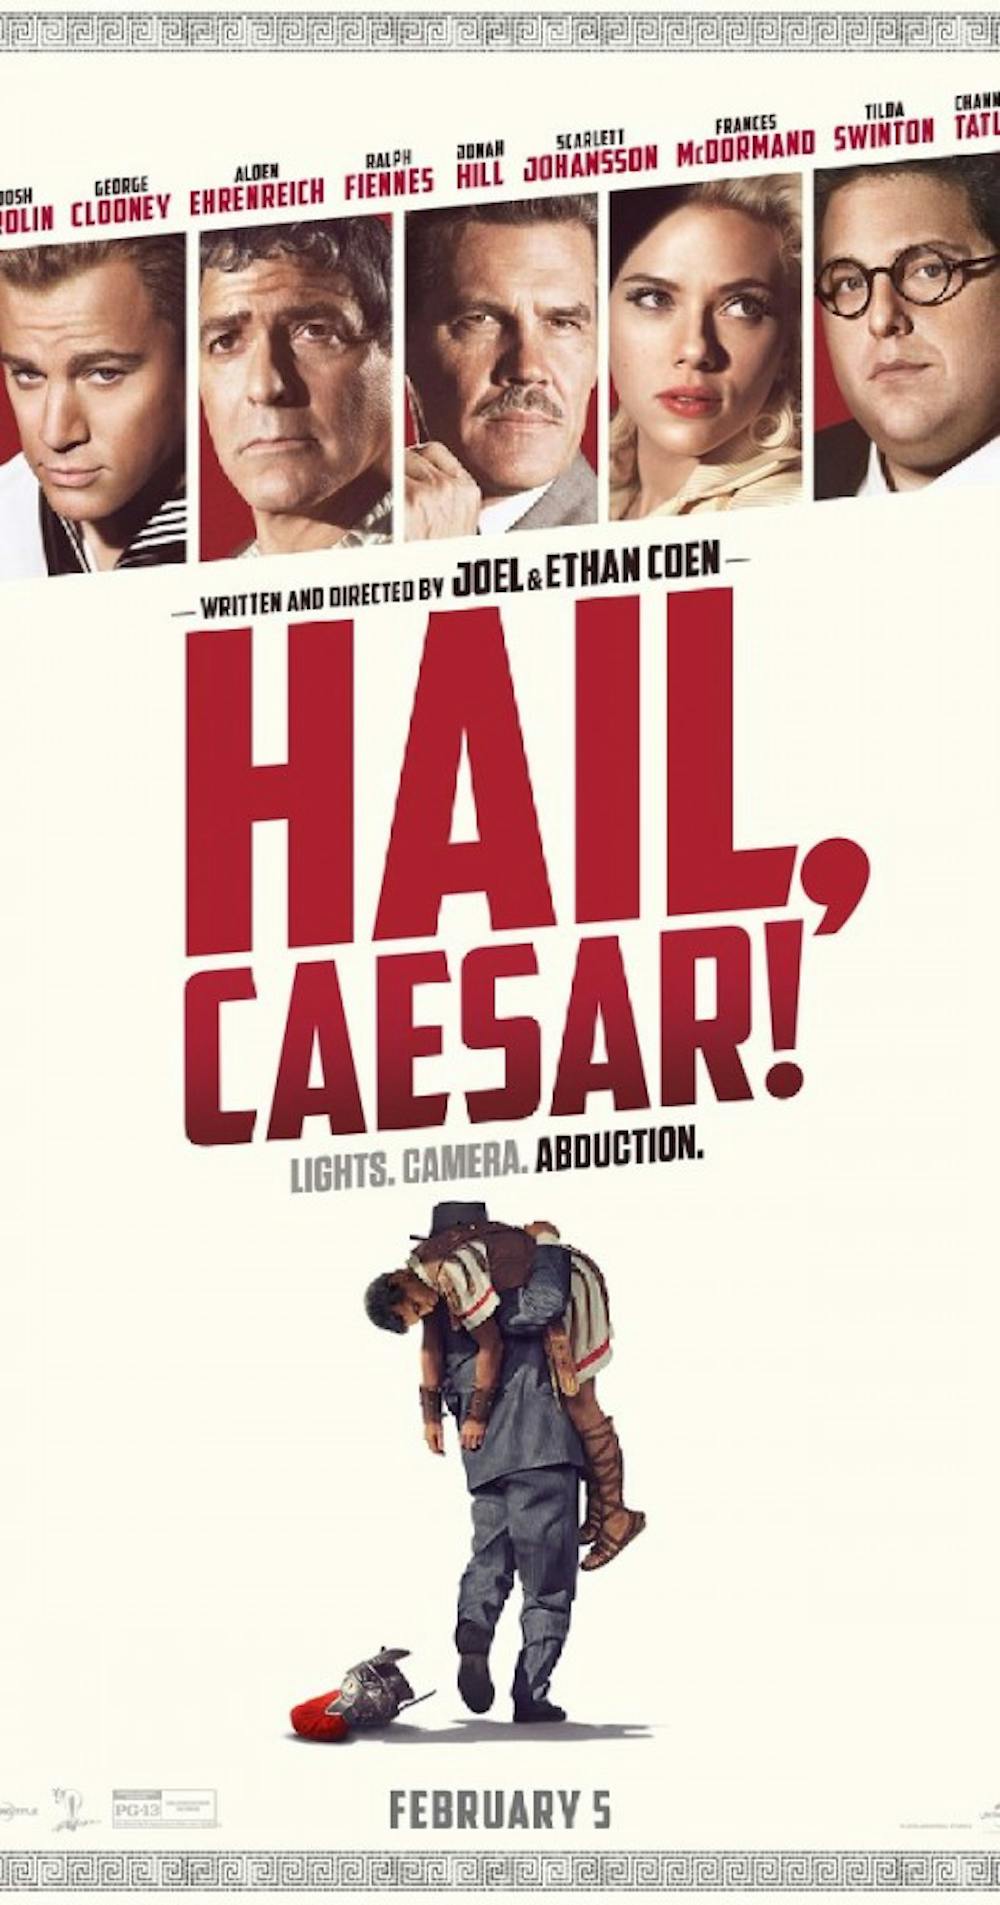 <p>“Hail, Caesar!” is about a 1950s Hollywood fixer for Capital Pictures who tries to solve problems for celebrities in the industry. The movie released in theaters Friday. <em>PHOTO COURTESY OF IMDB.COM</em></p>